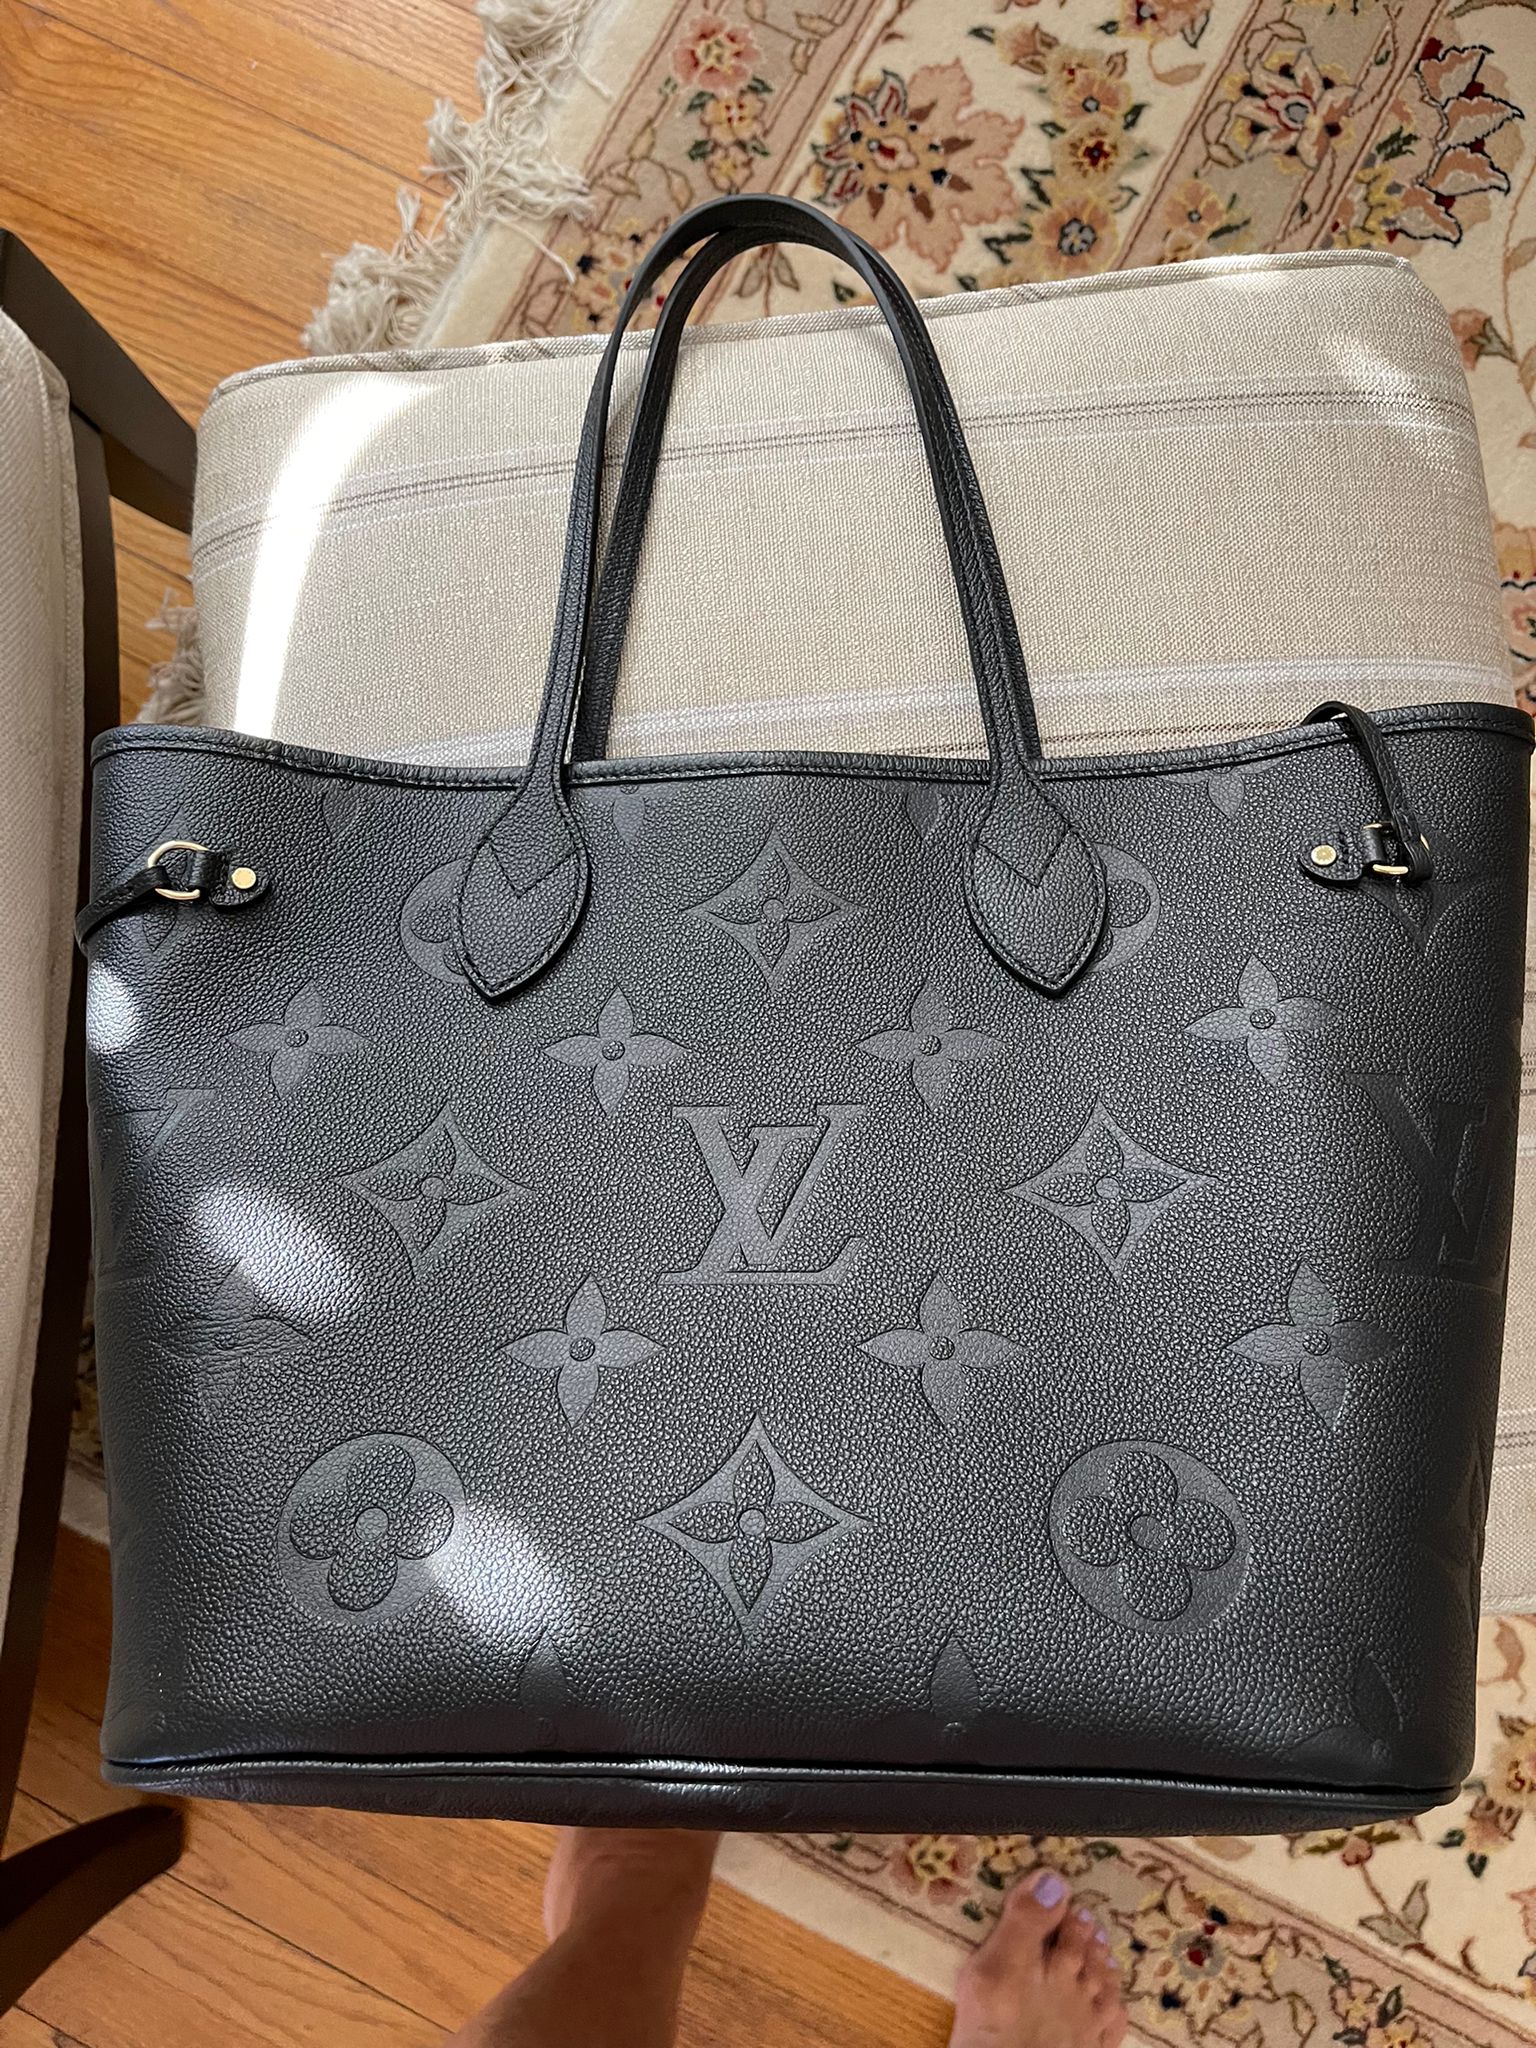 LOUIS VUITTON PULLS THE NEVERFULL OFF THE SHELF!! WHY